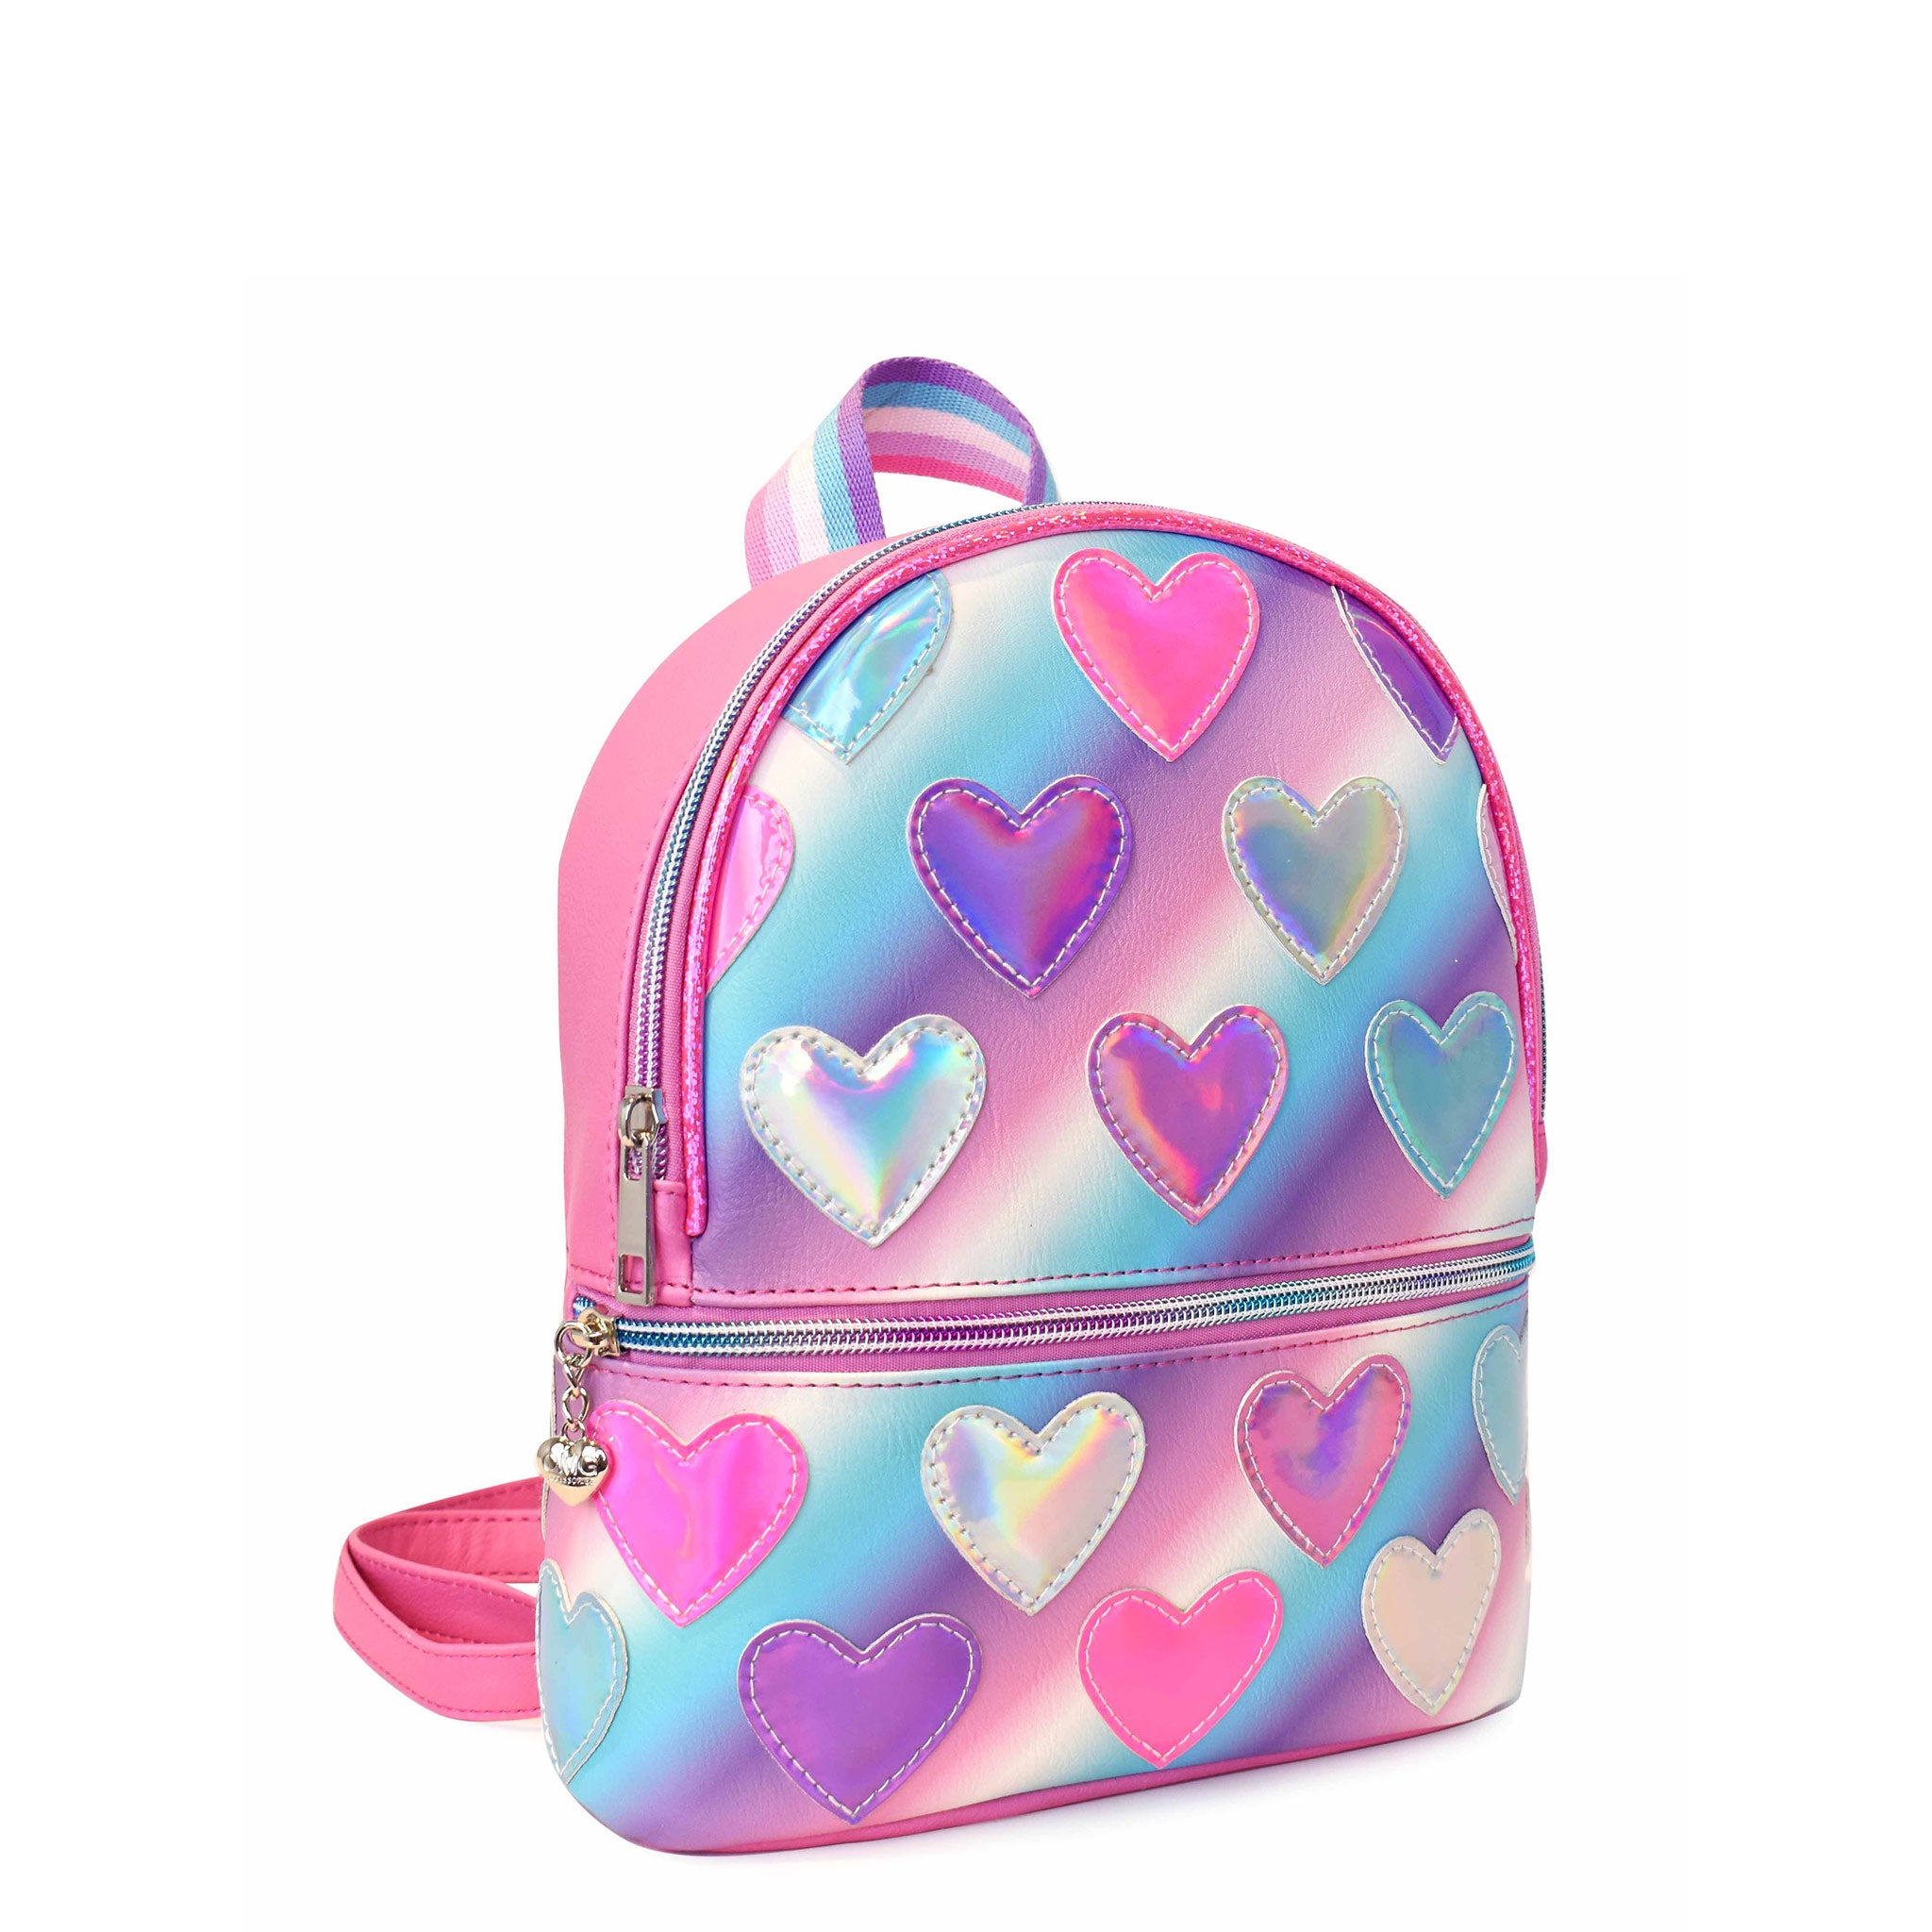 Side view of a cool toned pastel ombre mini backpack with metallic heart patches